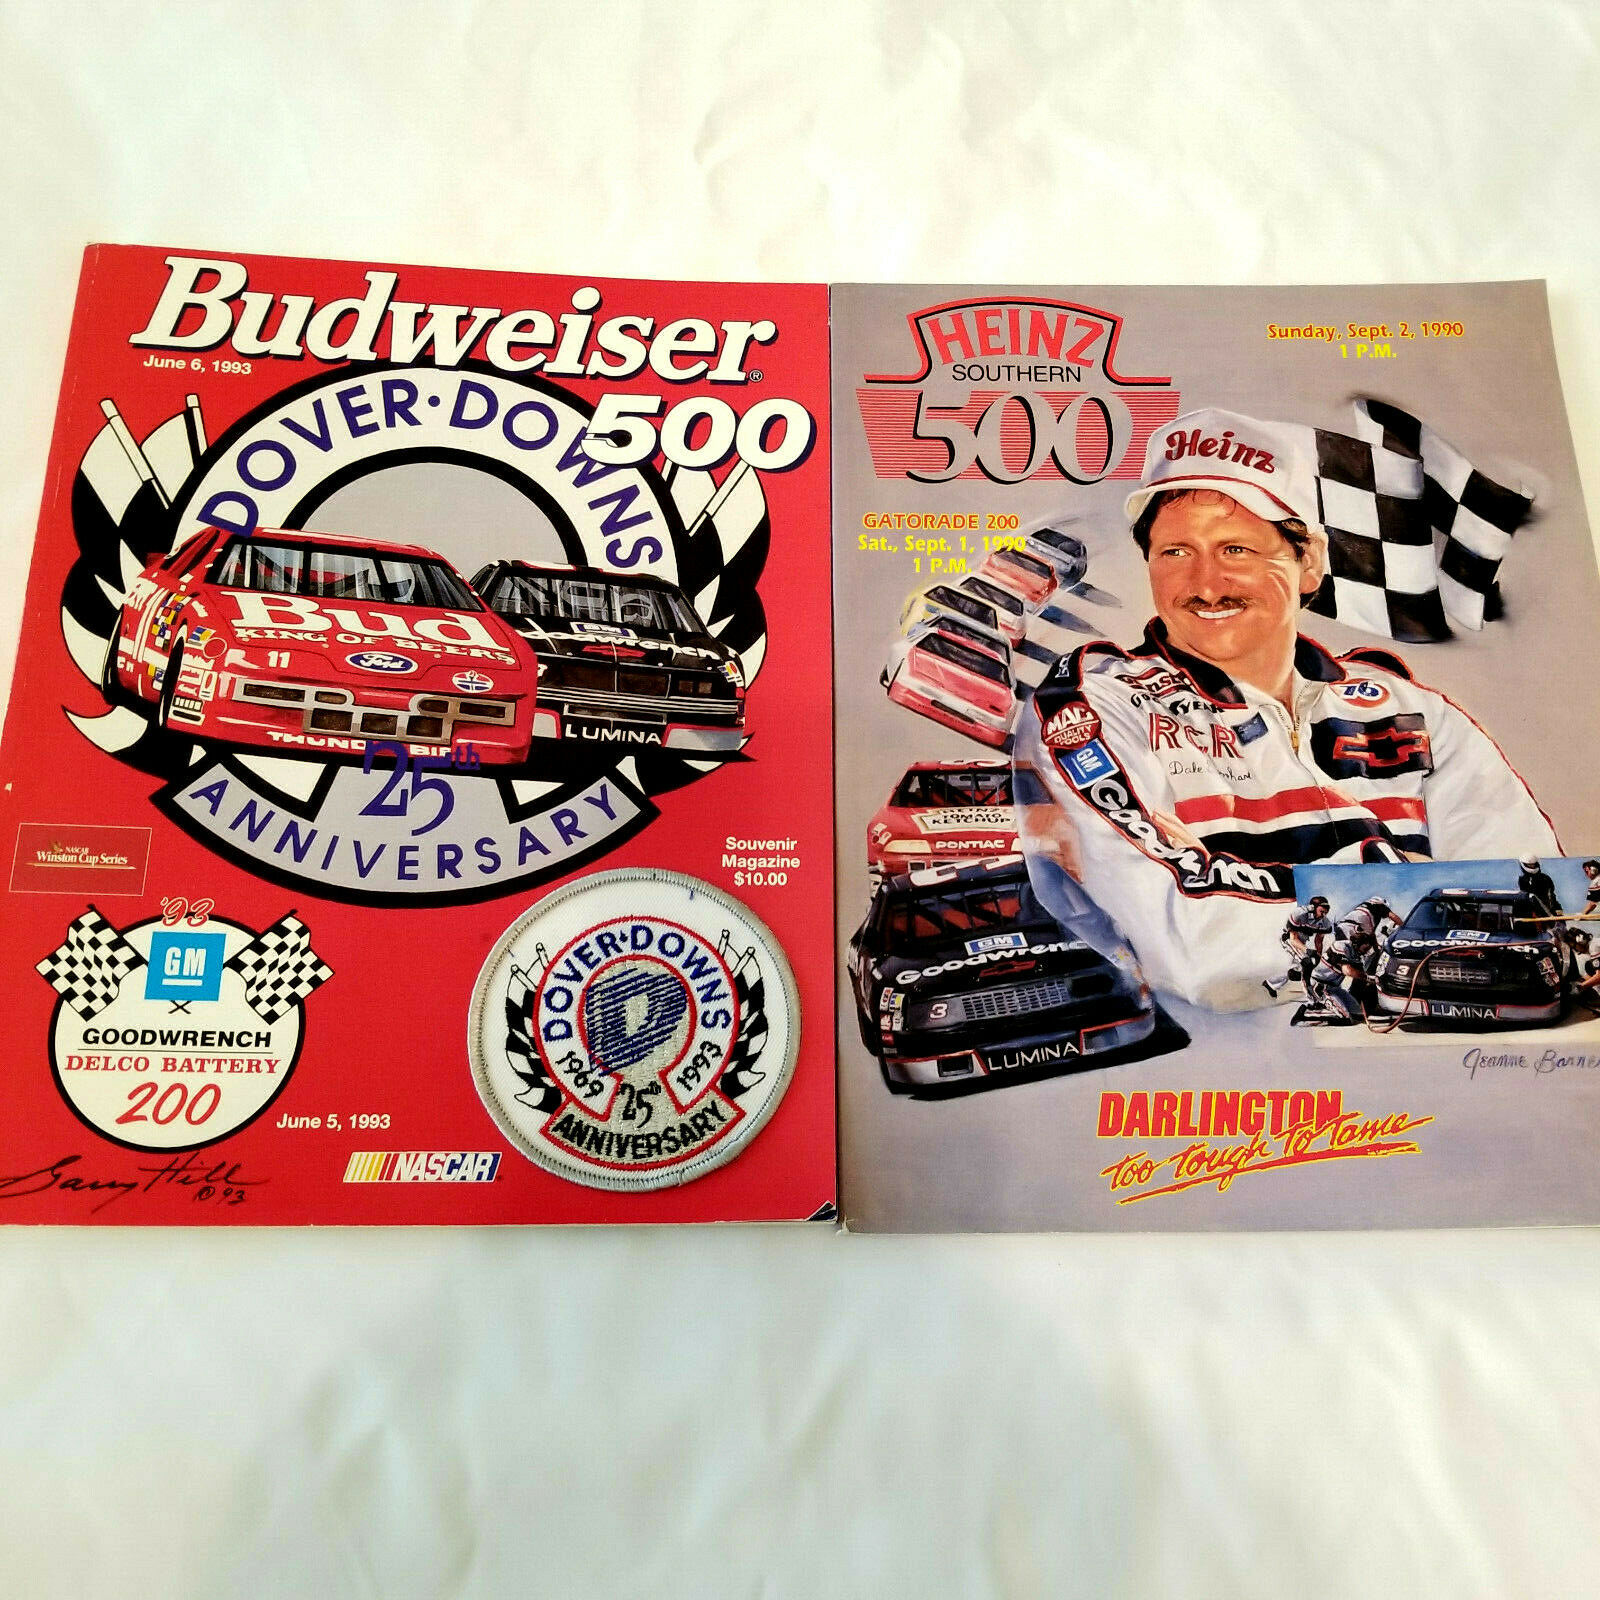 Primary image for Dover Downs June 1993 + Patch and Heinz 500 Sept 1990 NASCAR Program Books